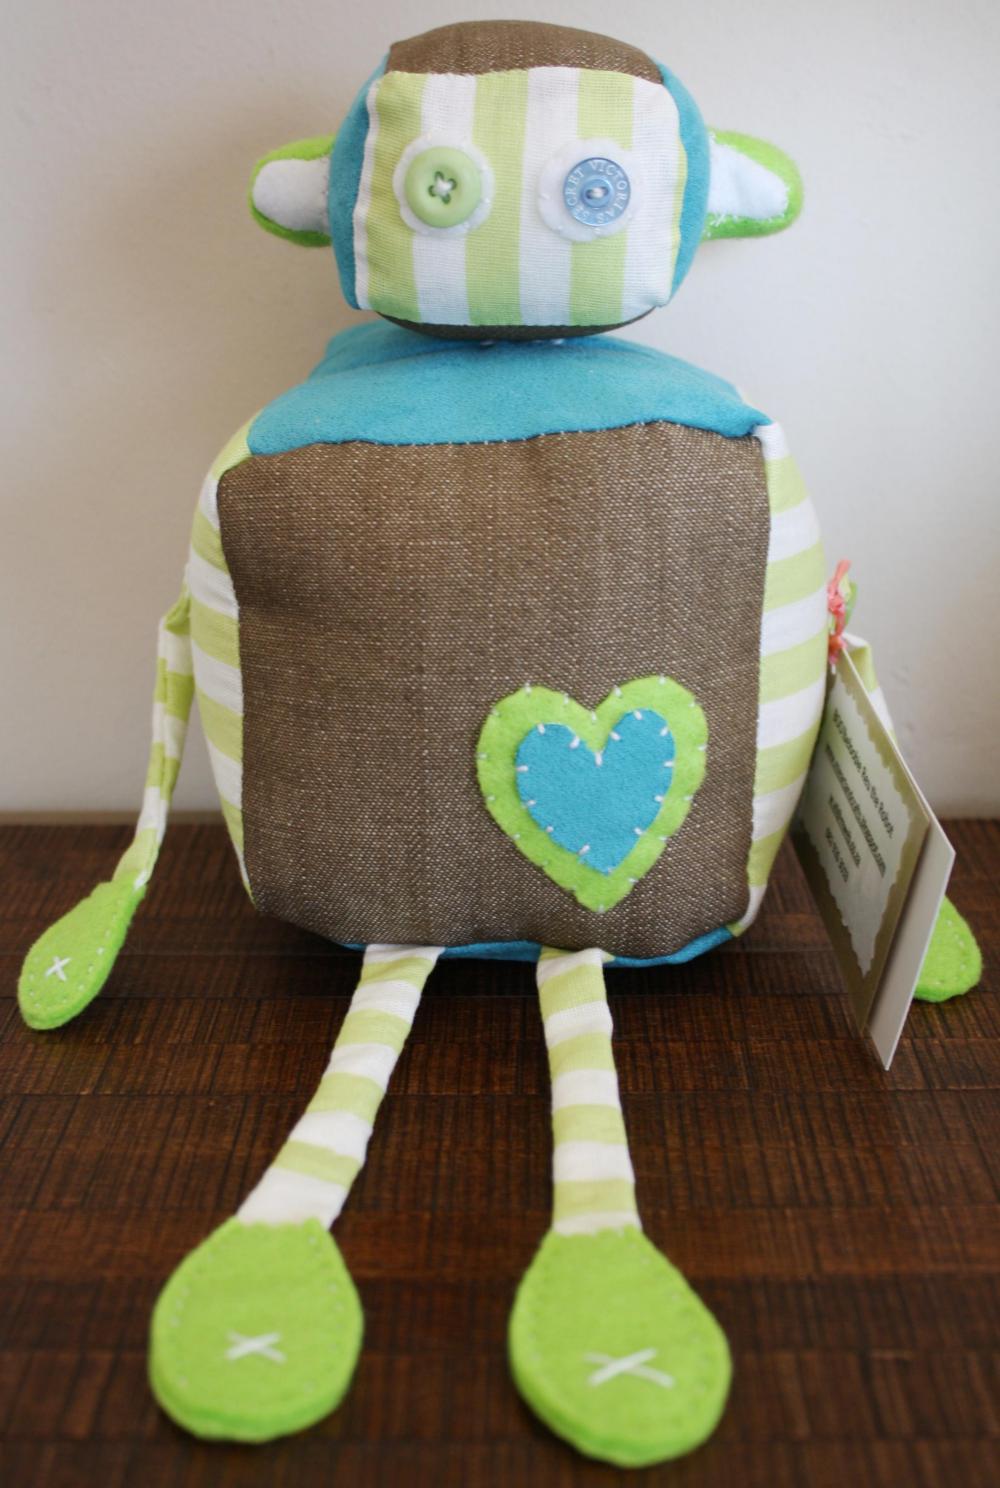 Boobeloobie Reu The Robot In Tan Denim, Blue Suede And Green And White Striped Cotton